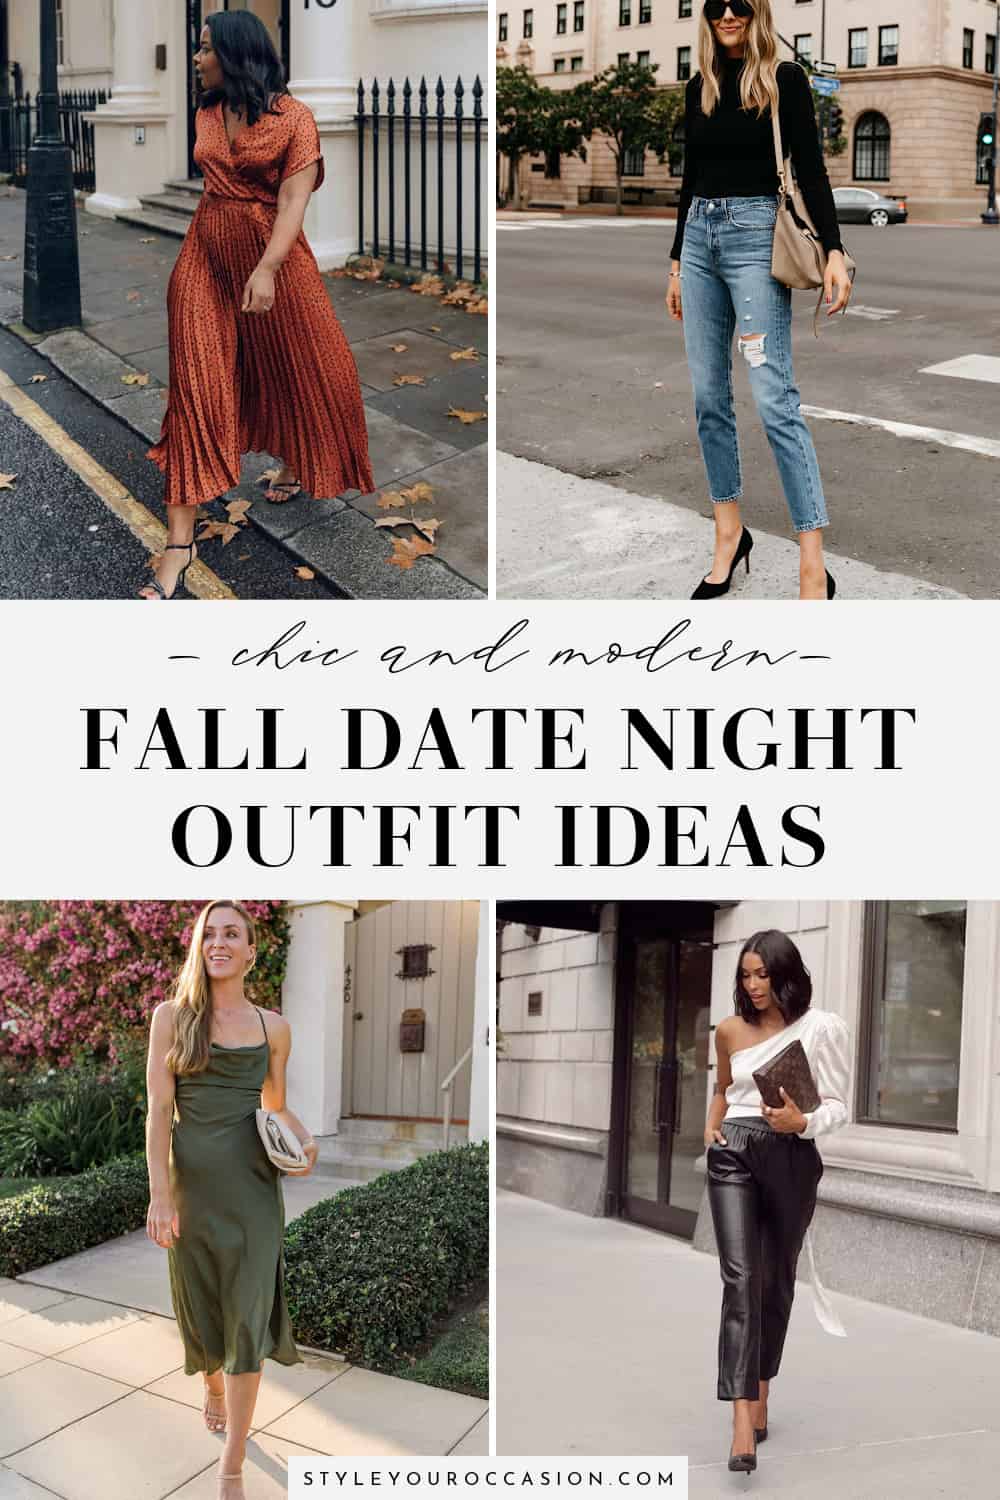 15+ Chic Fall Date Night Outfits You’ll Feel Amazing In!